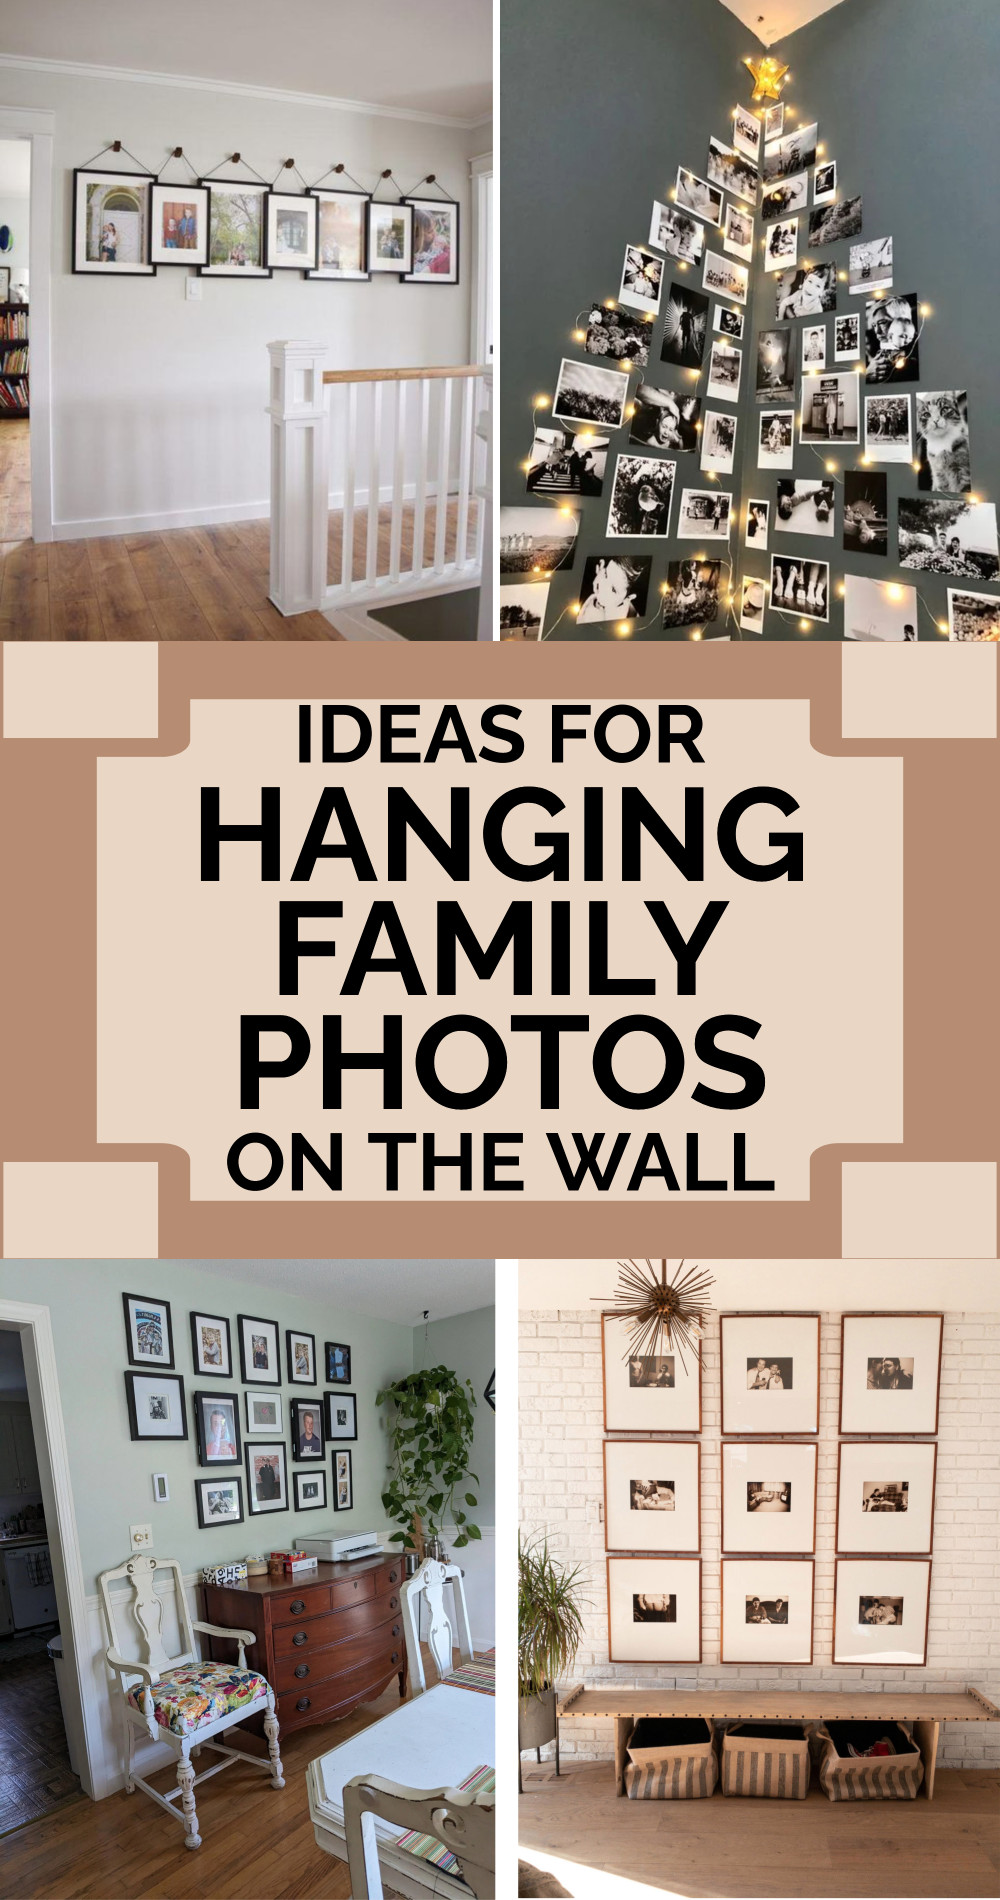 Ideas for hanging family photos on the wall